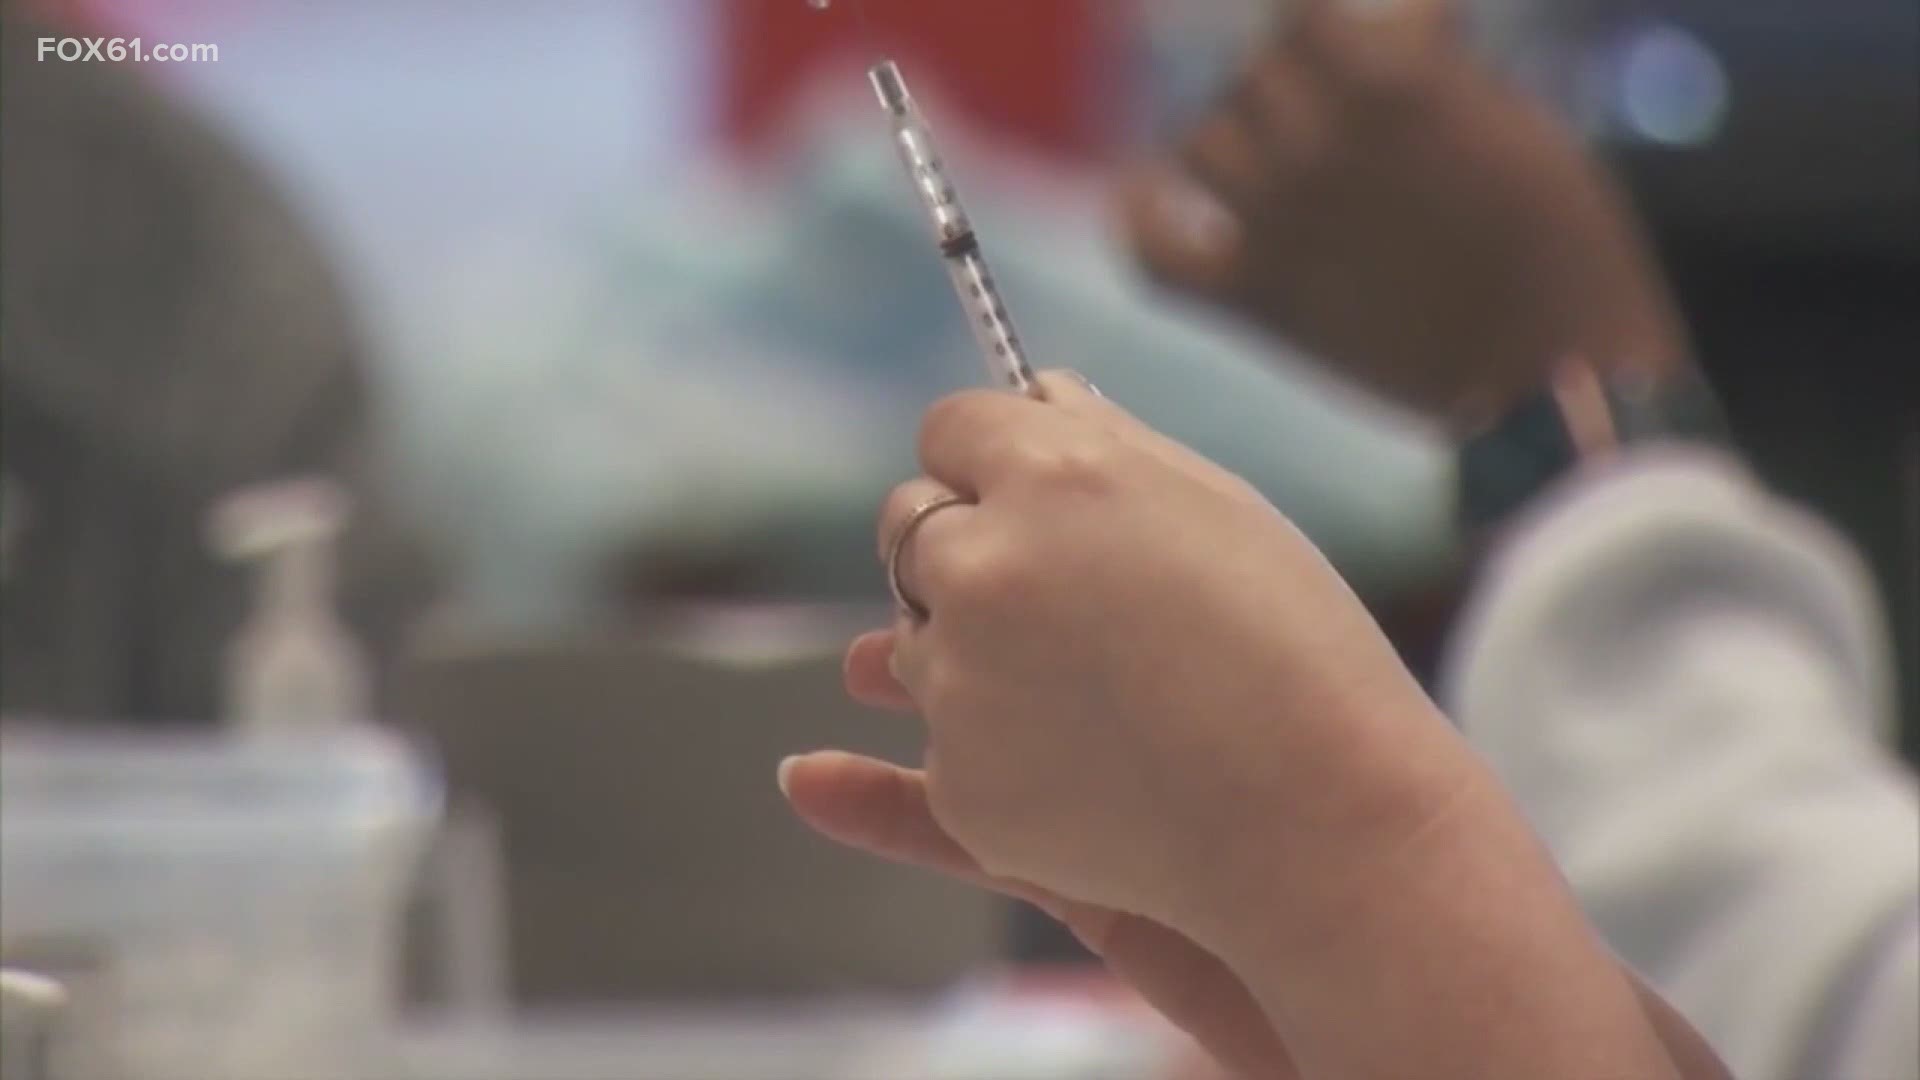 Health officials say it is more transmittable in those non-vaccinated groups and can cause severe symptoms and more hospitalizations.